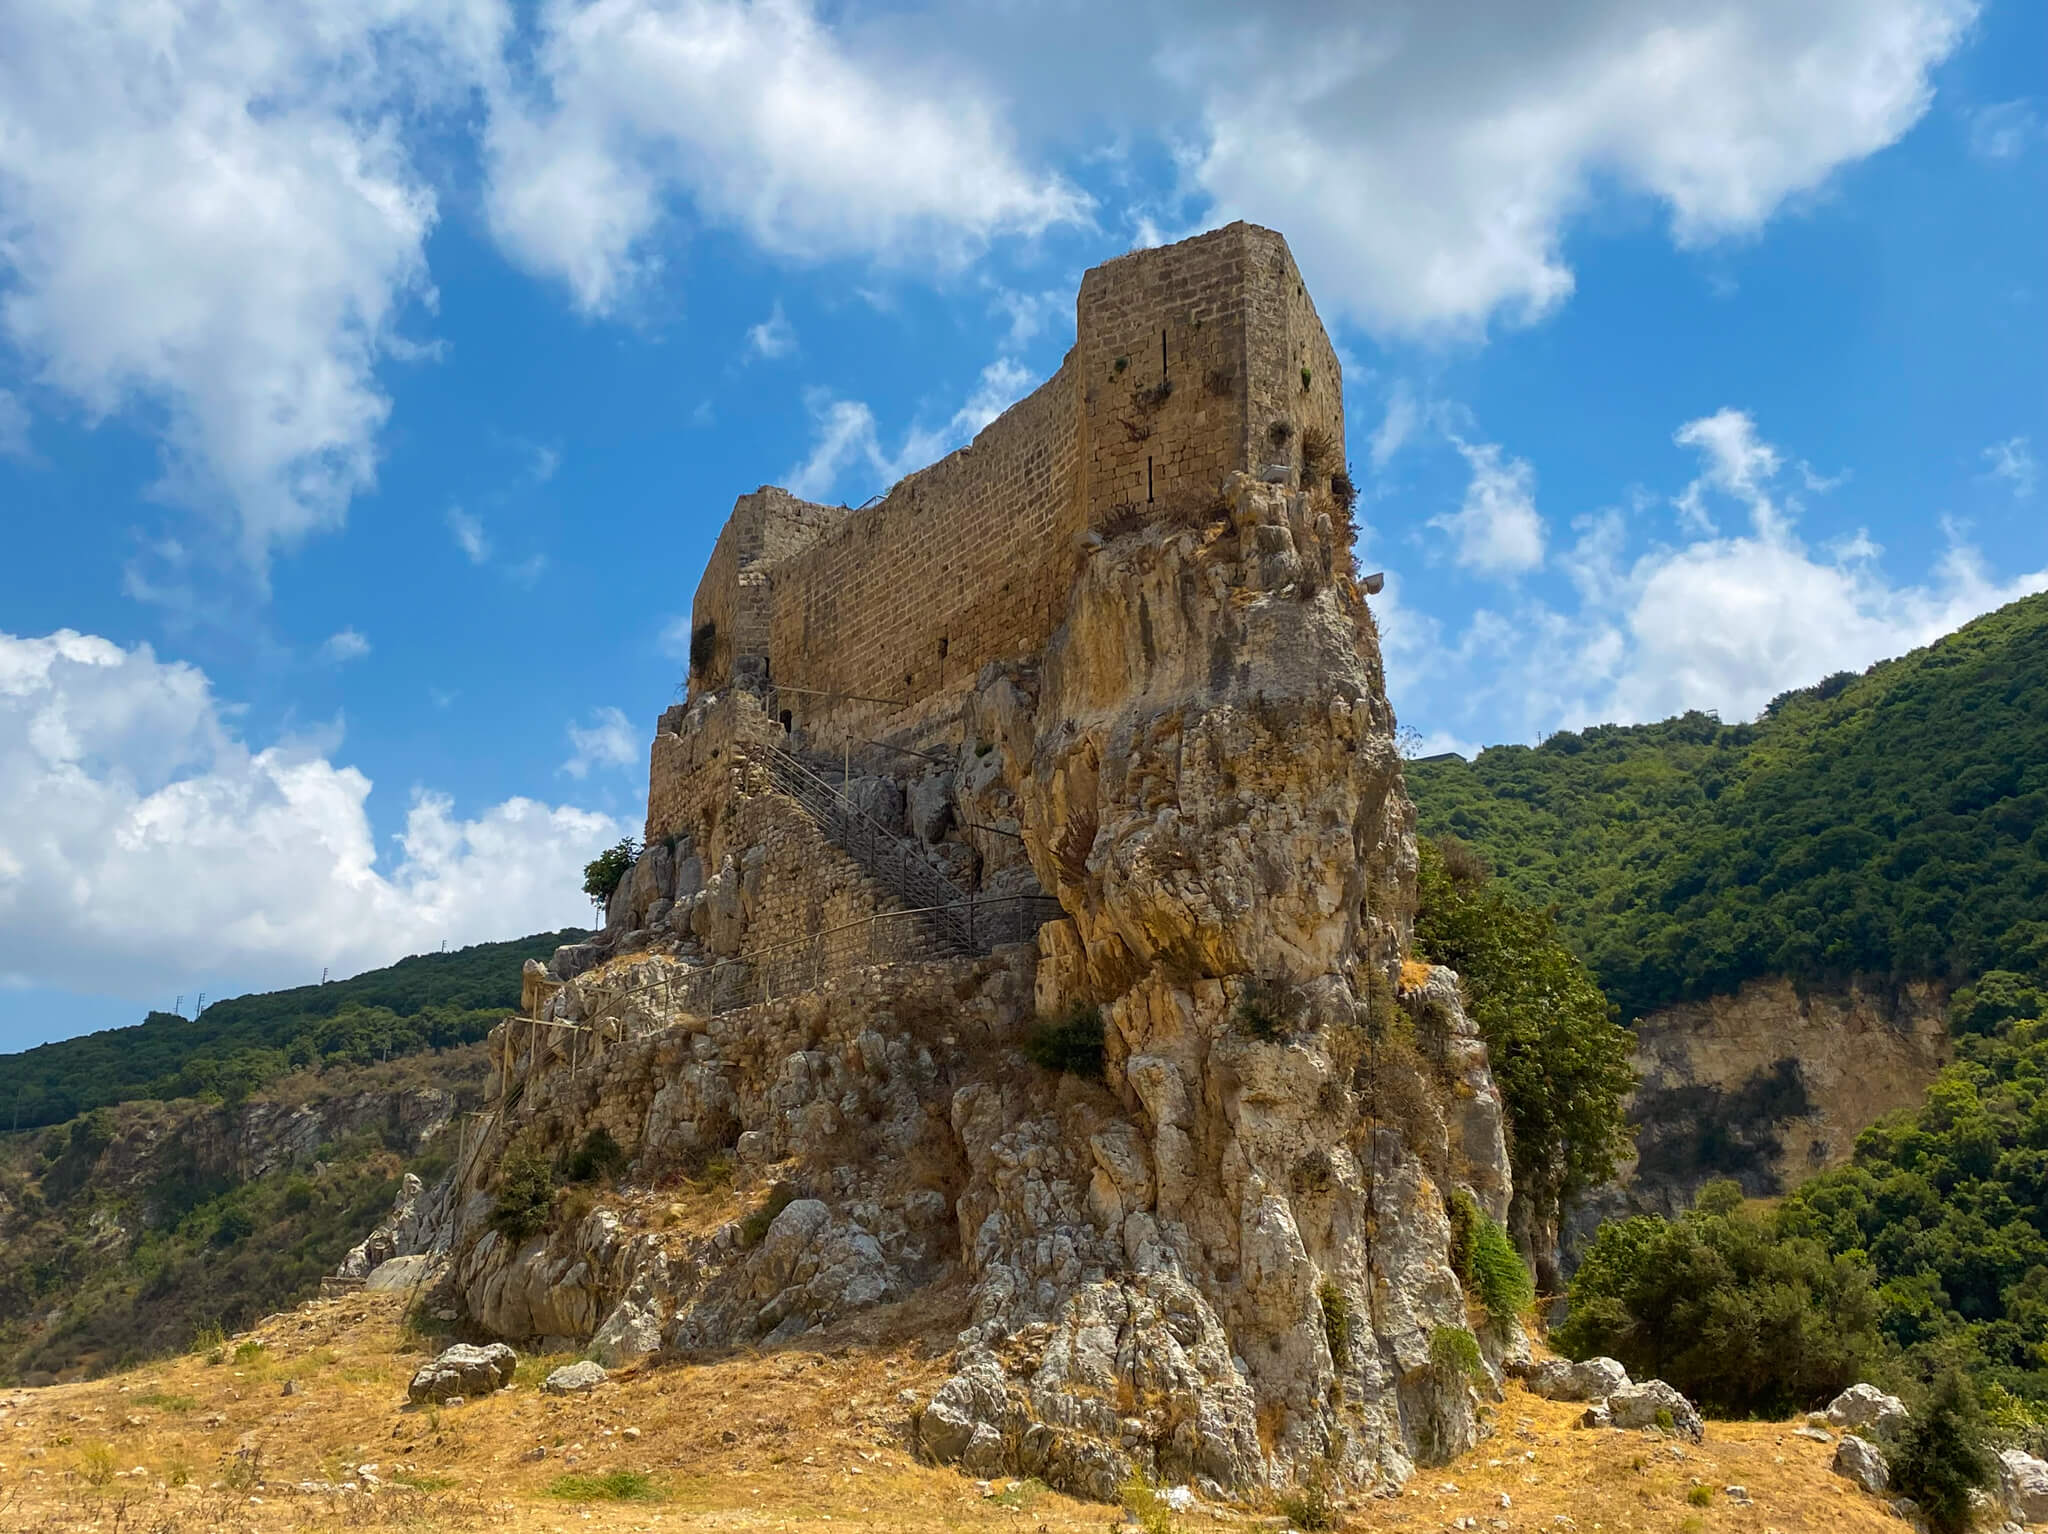 Mseilha Fort, perched on a rock with green hills and blue skies in the background.